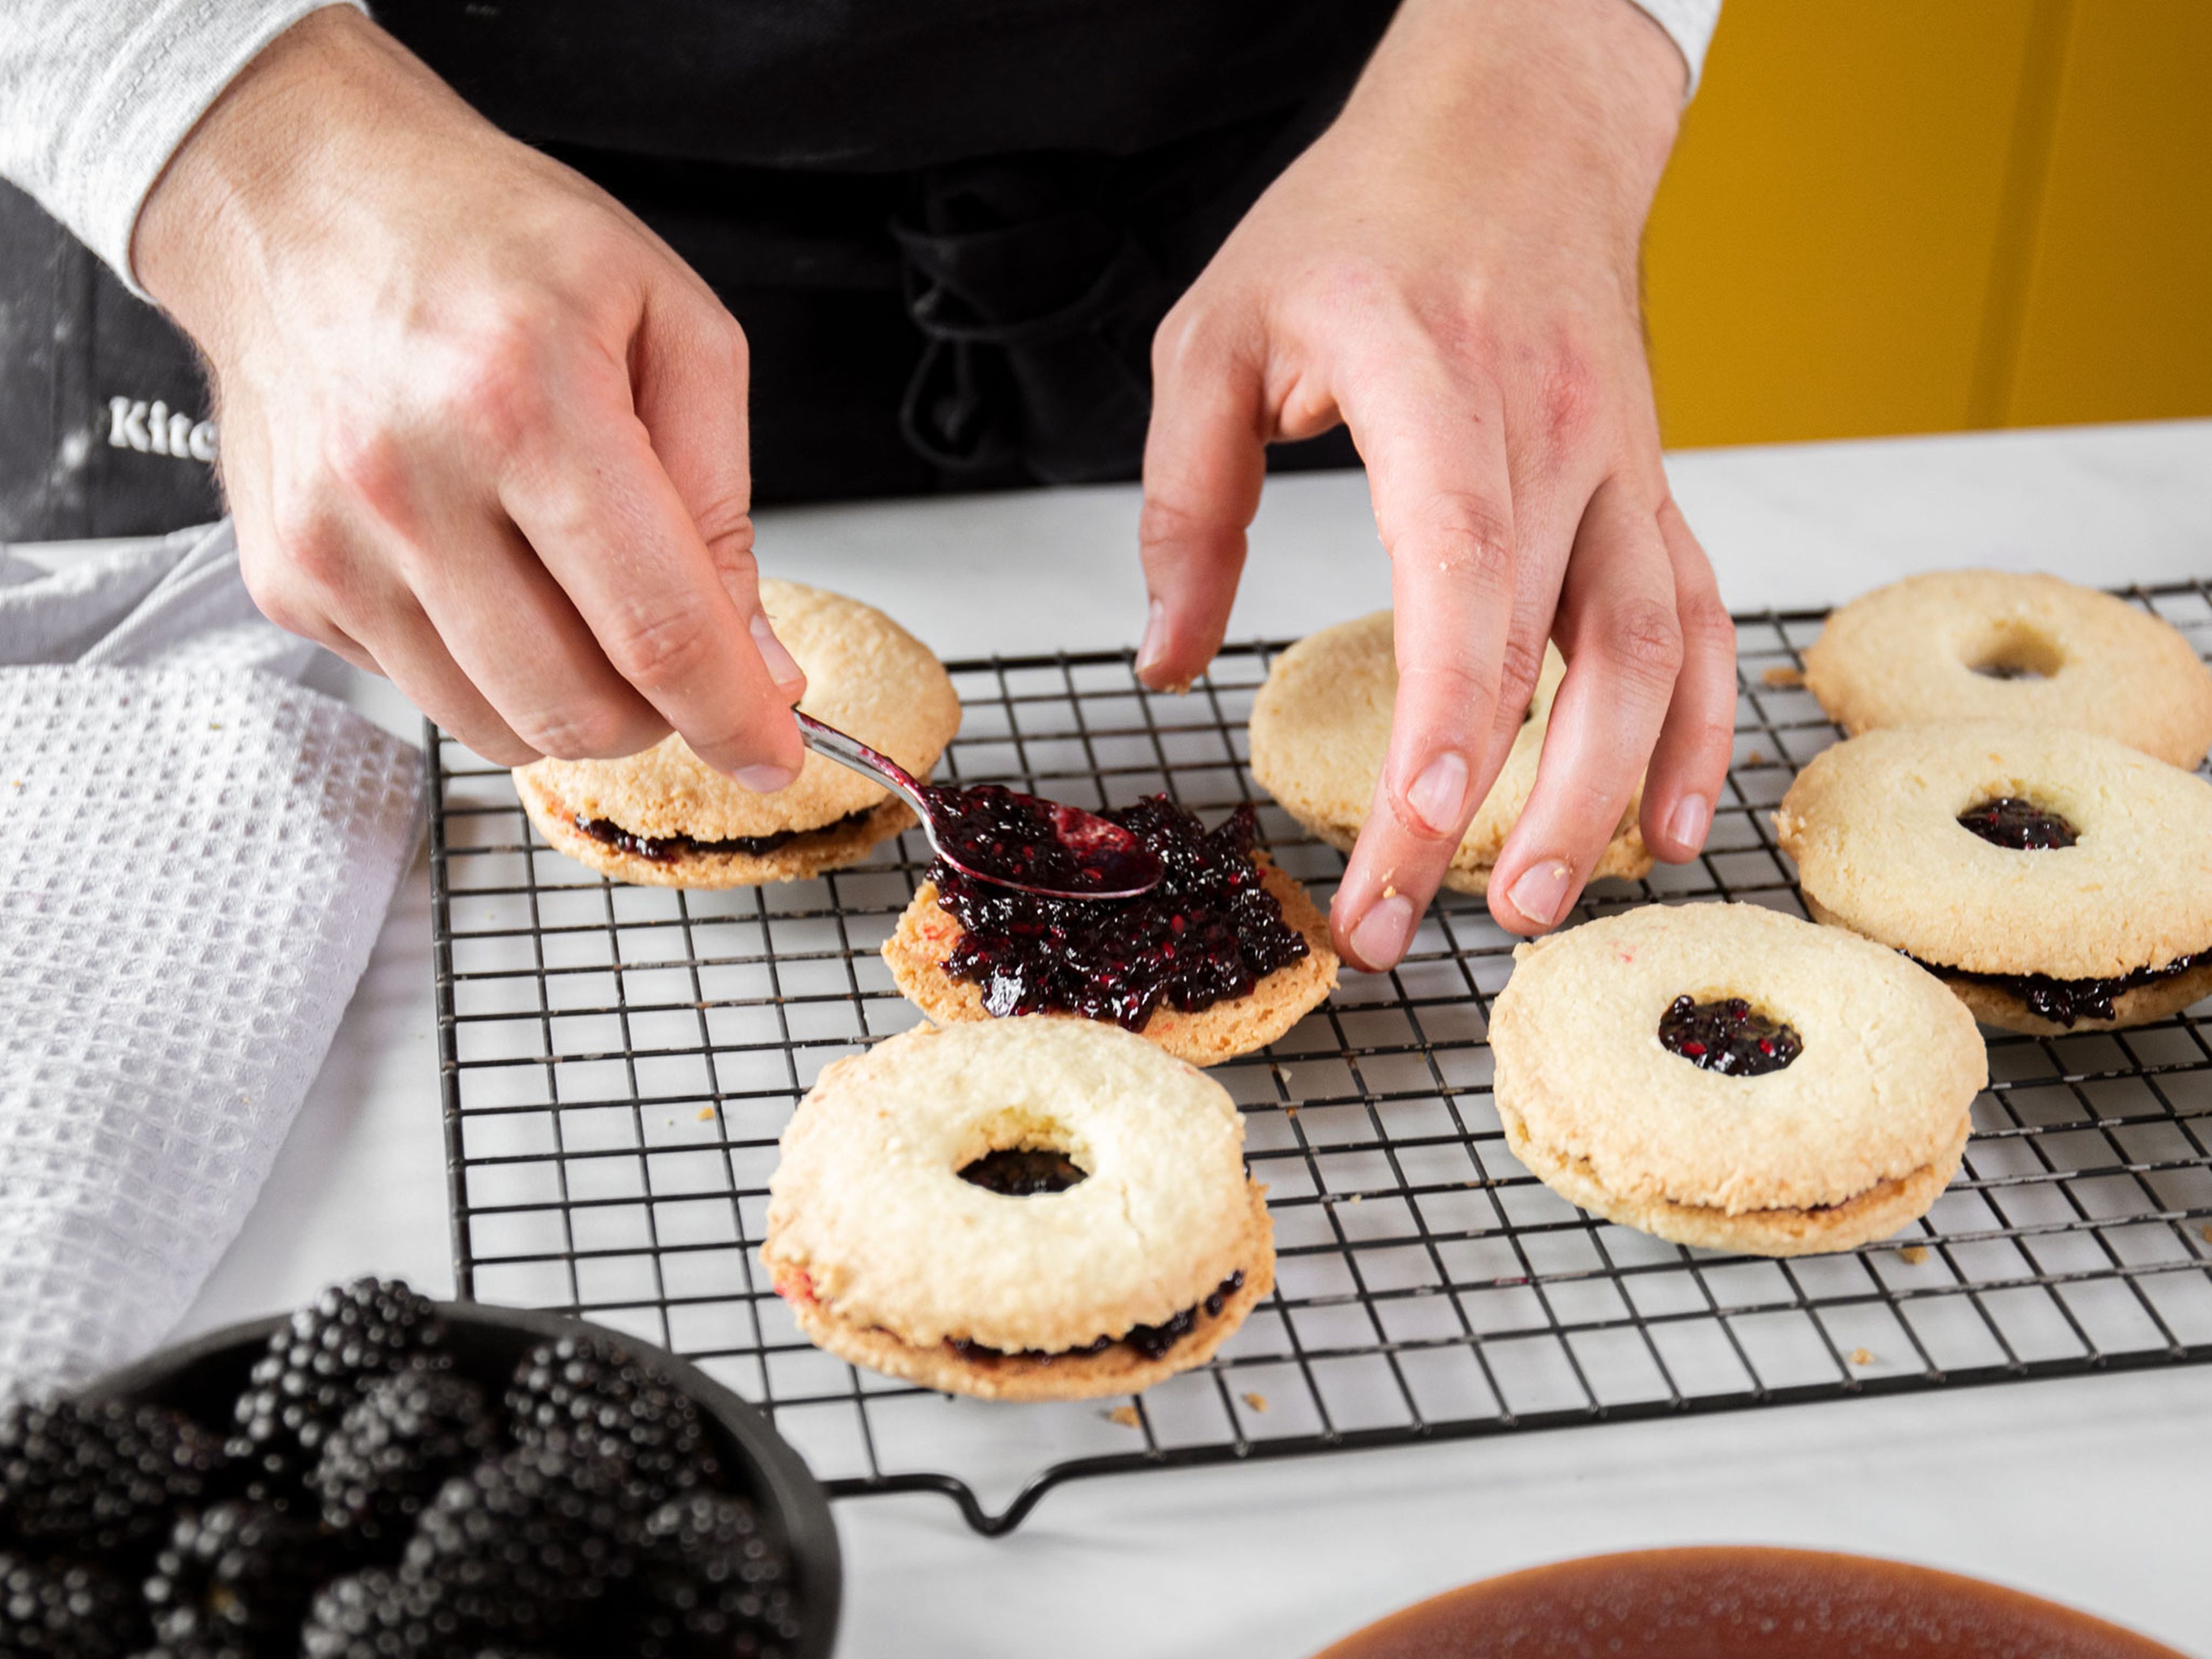 Add spoonfuls of blackberry jam to the full cookie rounds. Press a cut-out cookie round onto the top of each, twisting them on slightly to spread out the jam. Dust lightly with confectioner’s sugar and fill the holes of the cookies with one fresh blackberry, if desired. Enjoy!